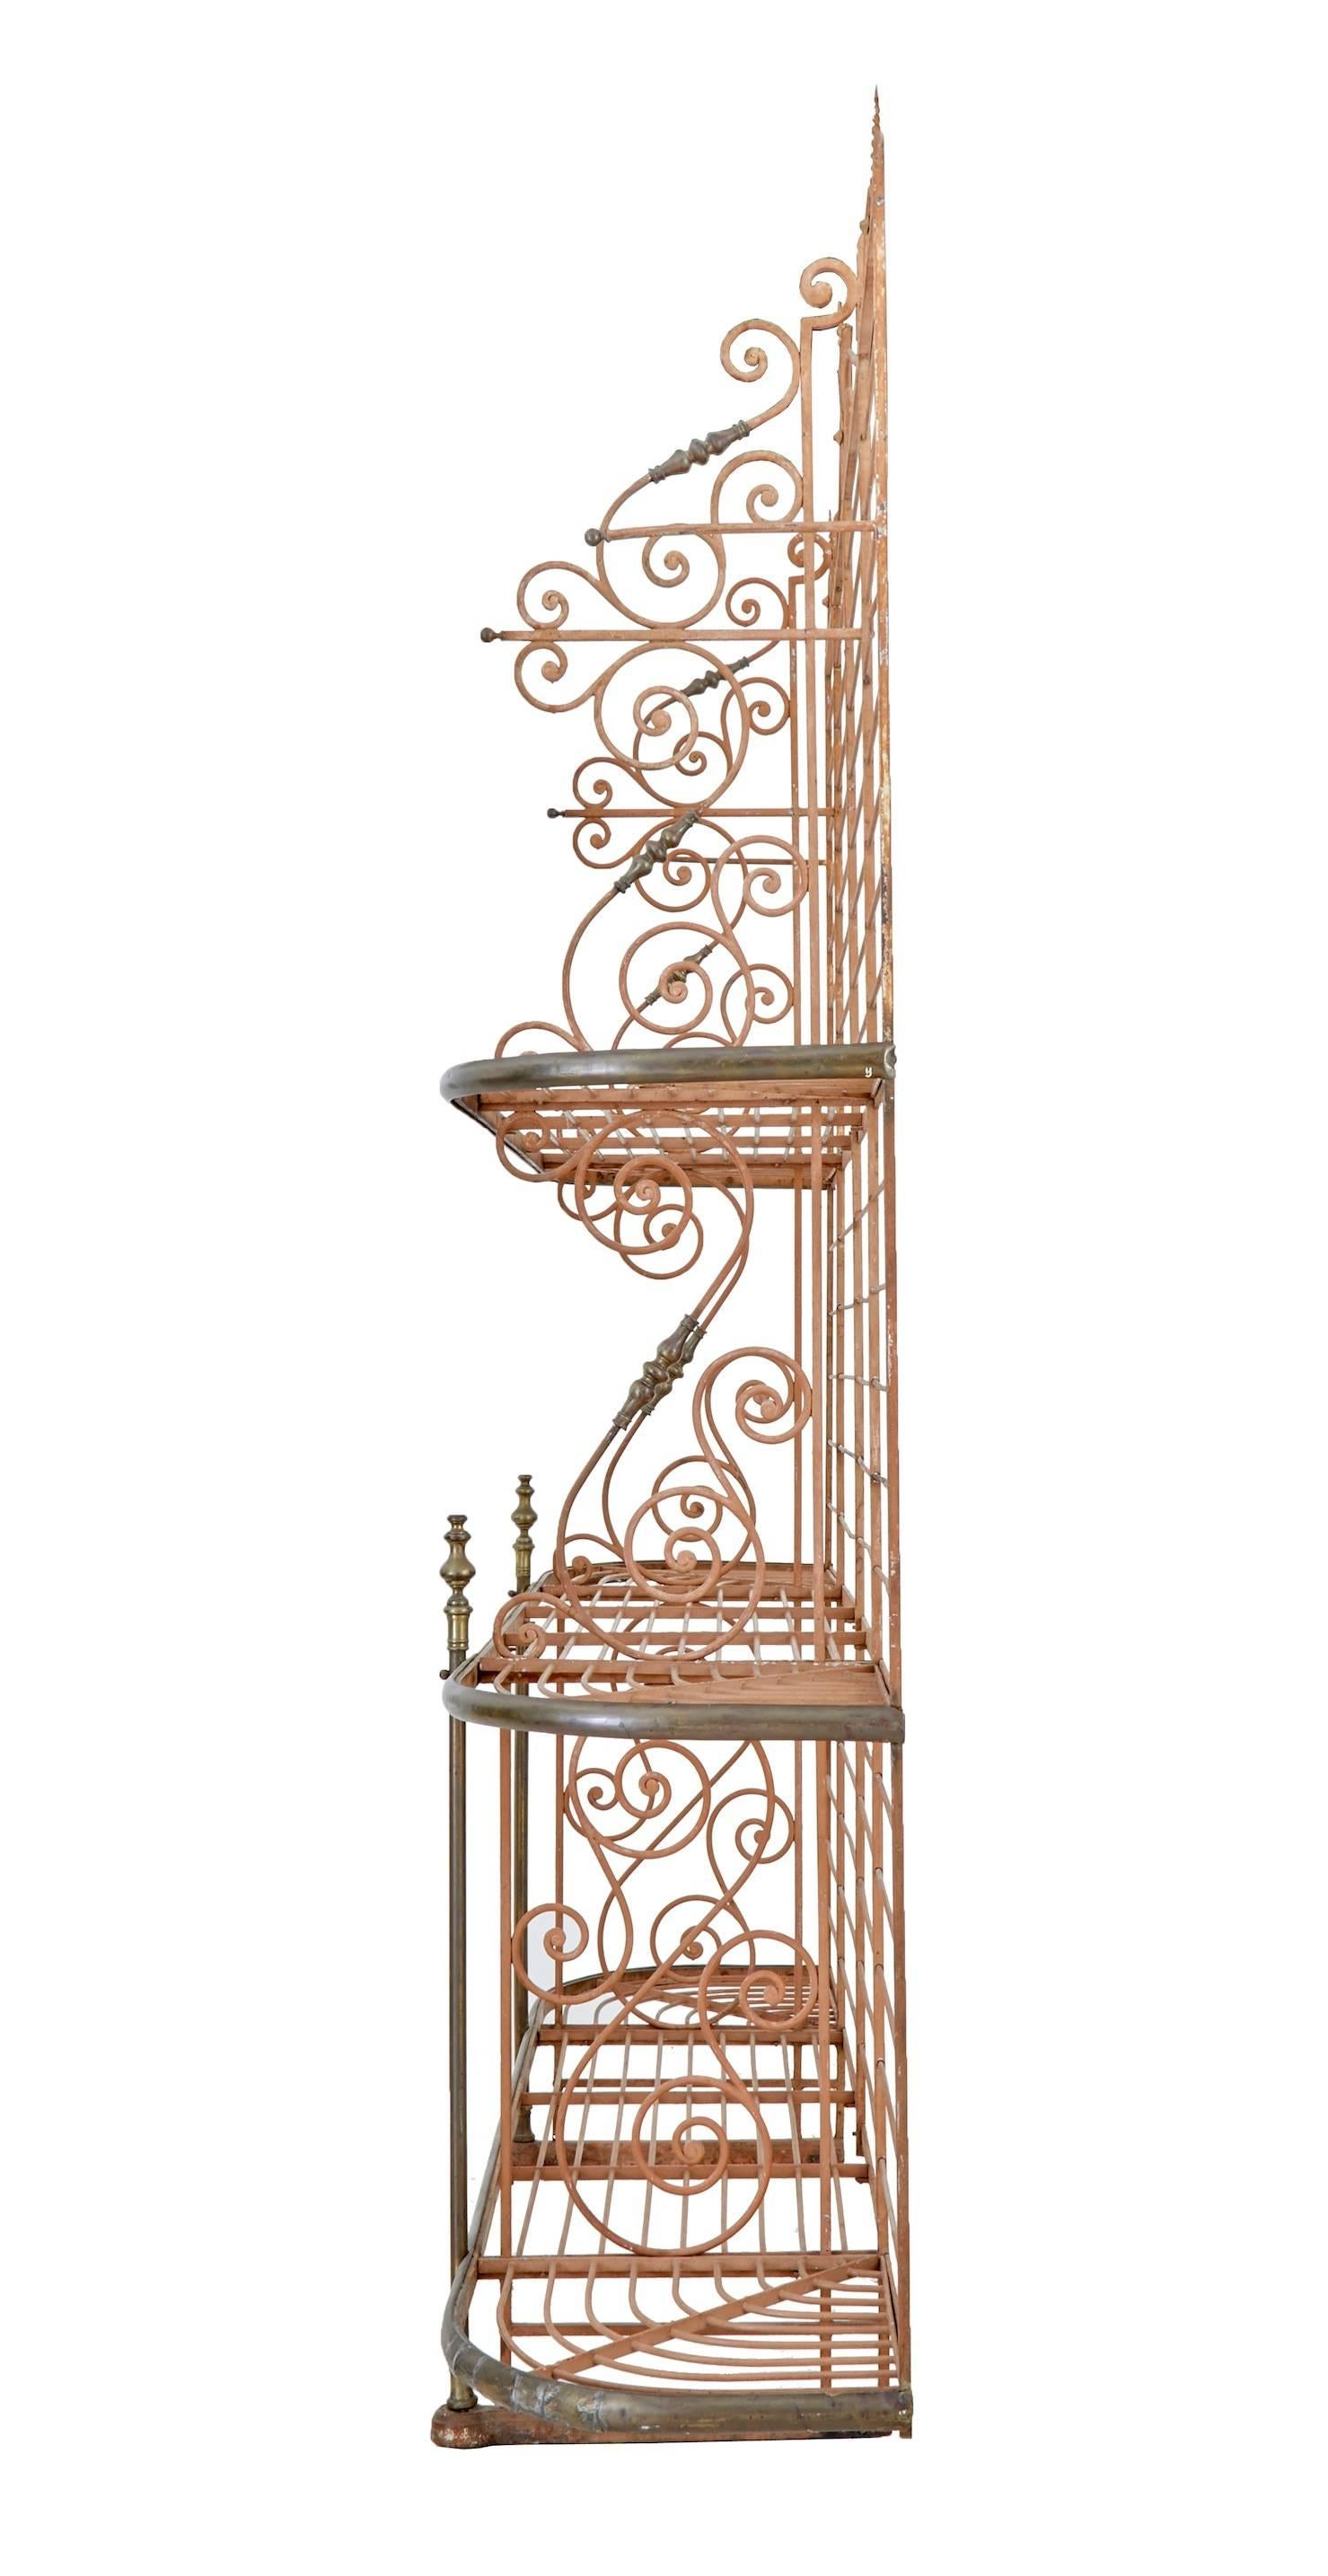 Superb quality boulangerie baguette rack, circa 1900
Made from iron with various detailing such as twists and monkey tails.
Three shelves with two partitions running the full height to provide 6 display areas.
One of the finest you will find on